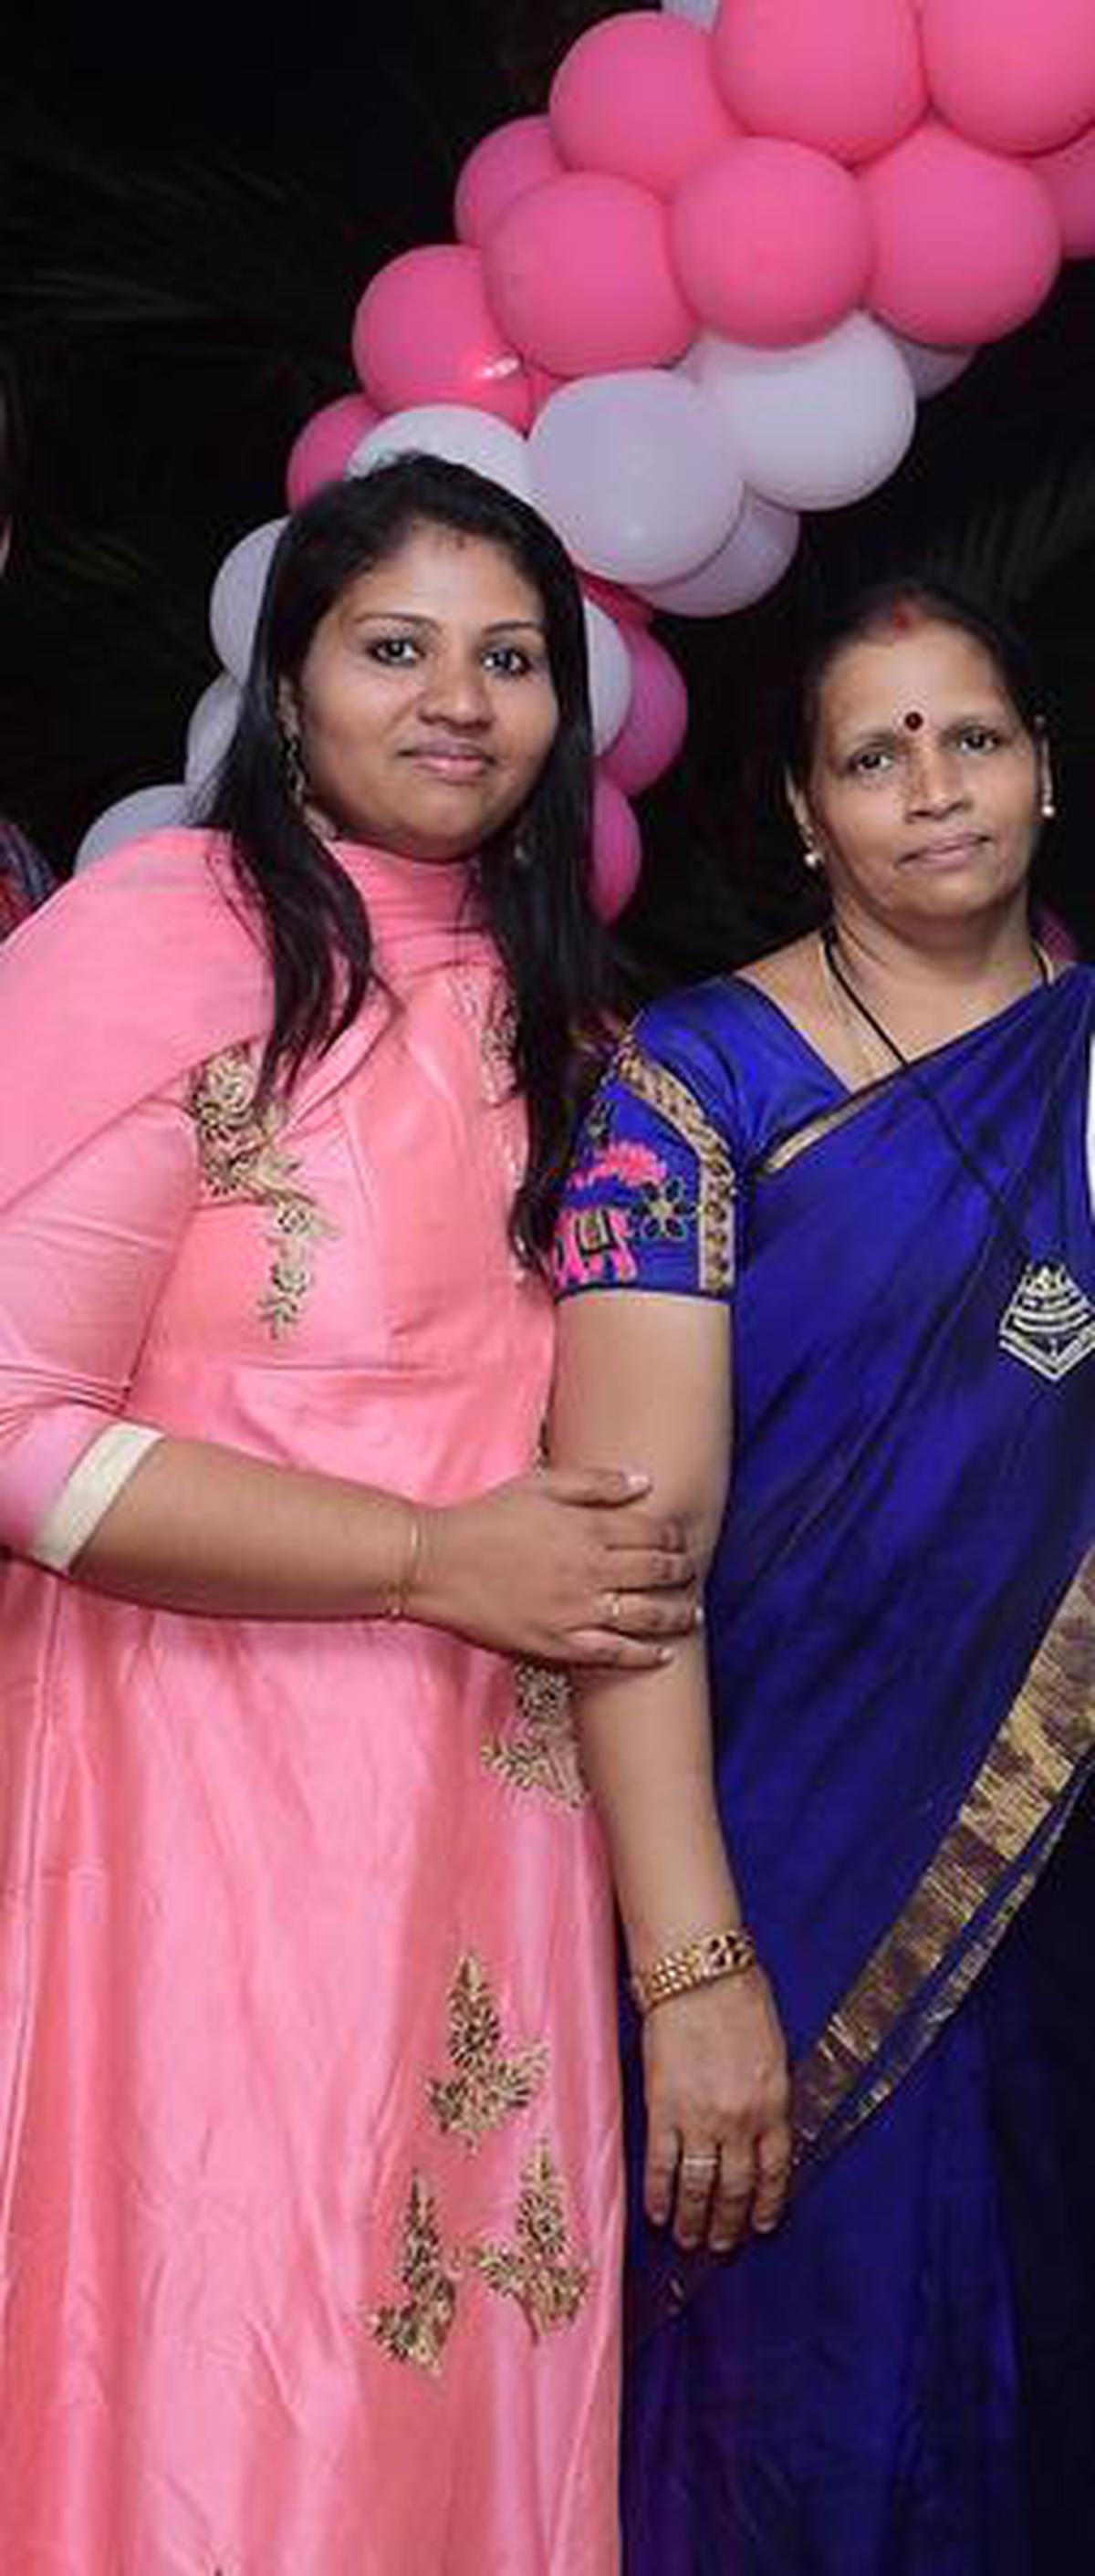 Sreeveena S with her mother, Seethalekshmy